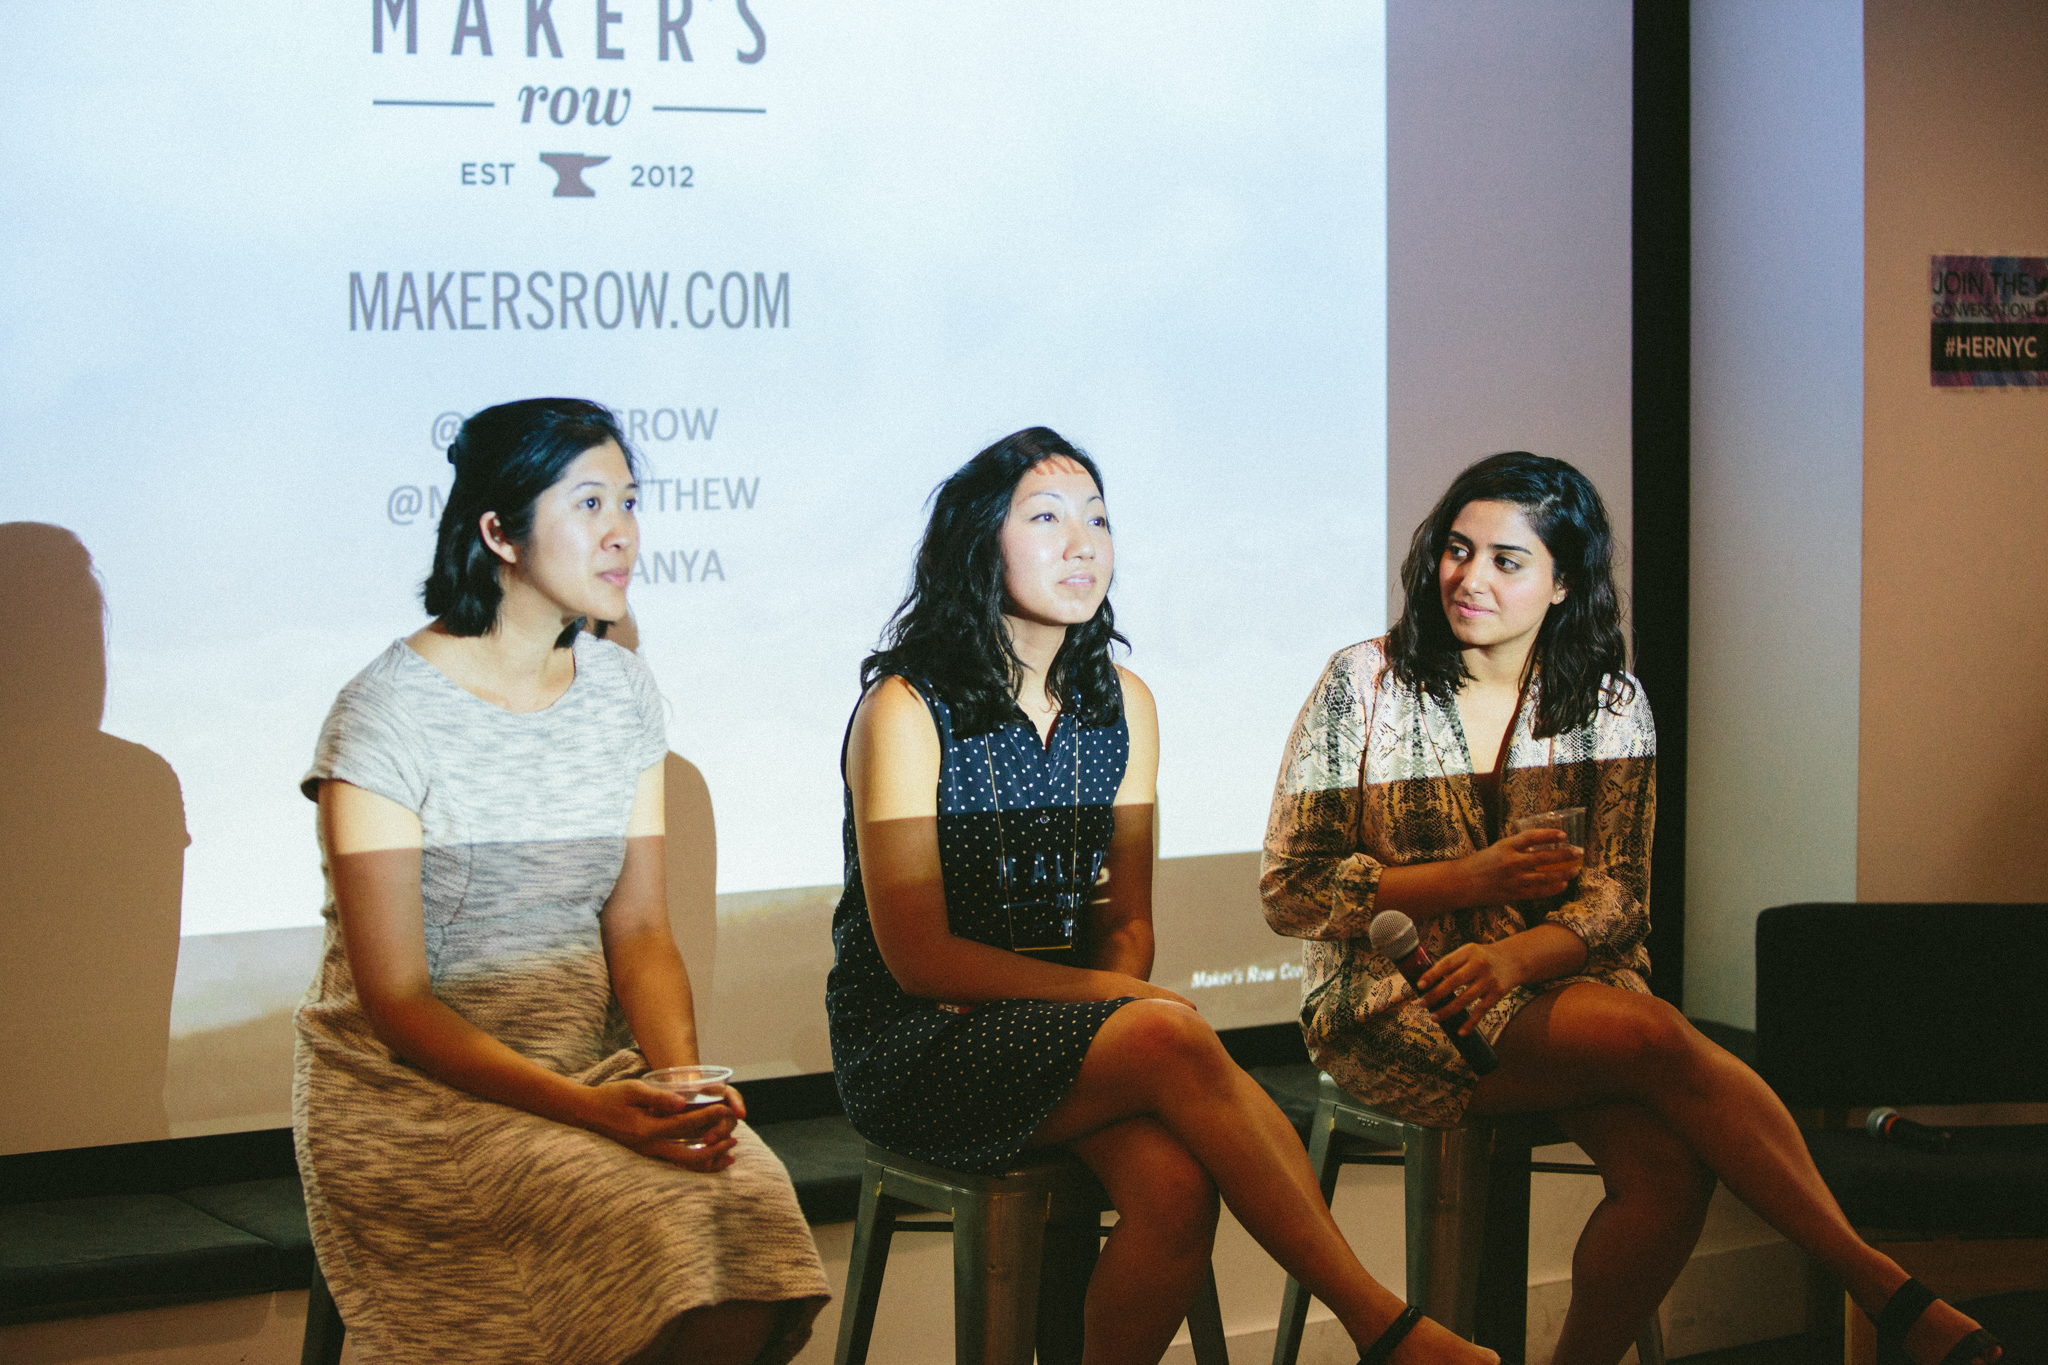 Women In Tech with Maker's Row, Knewton, and Venture for America